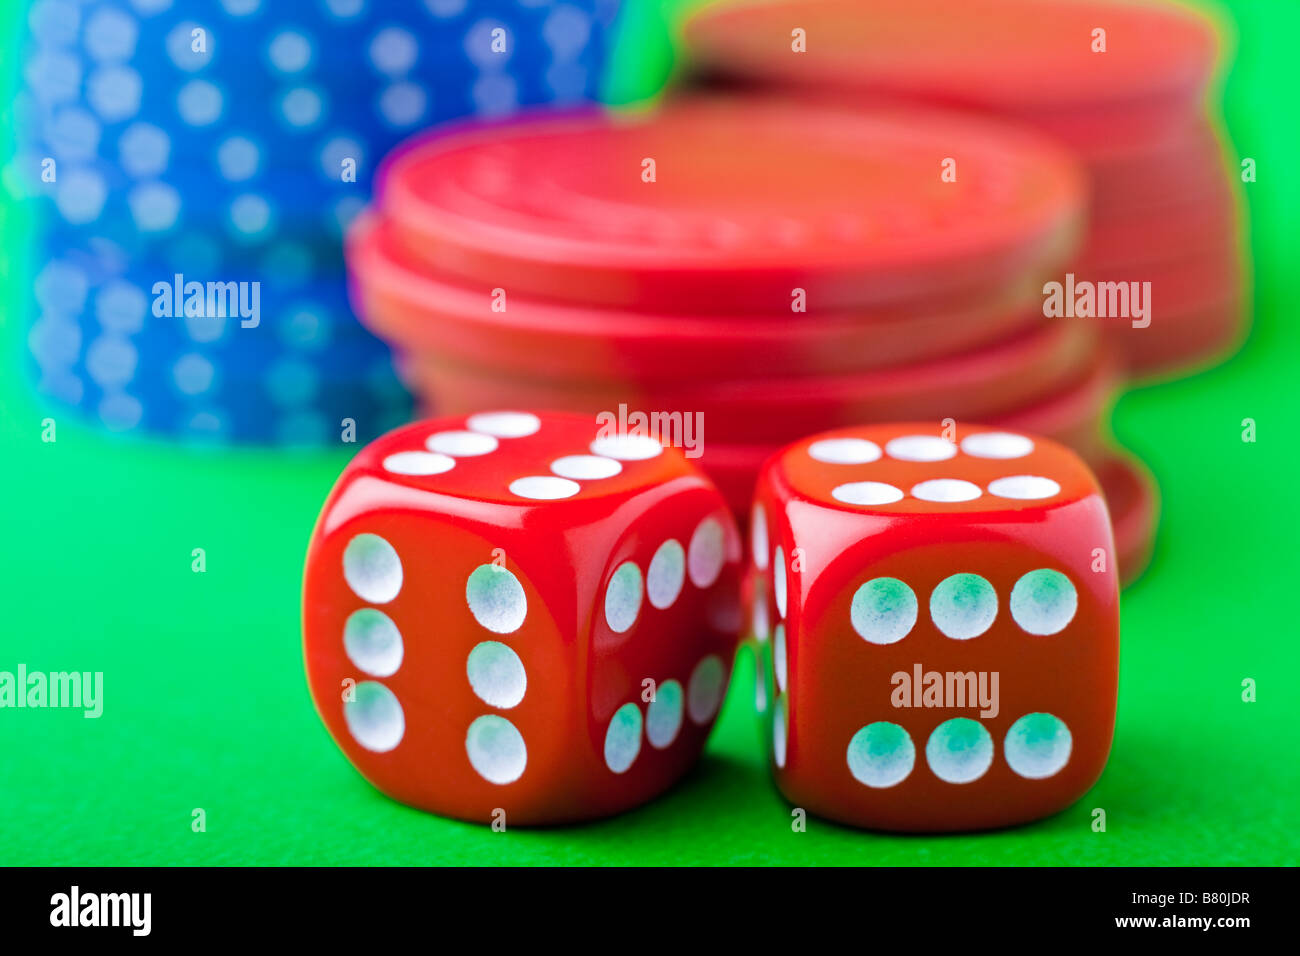 Crooked dice with sixes on all sides and poker chips Stock Photo Alamy